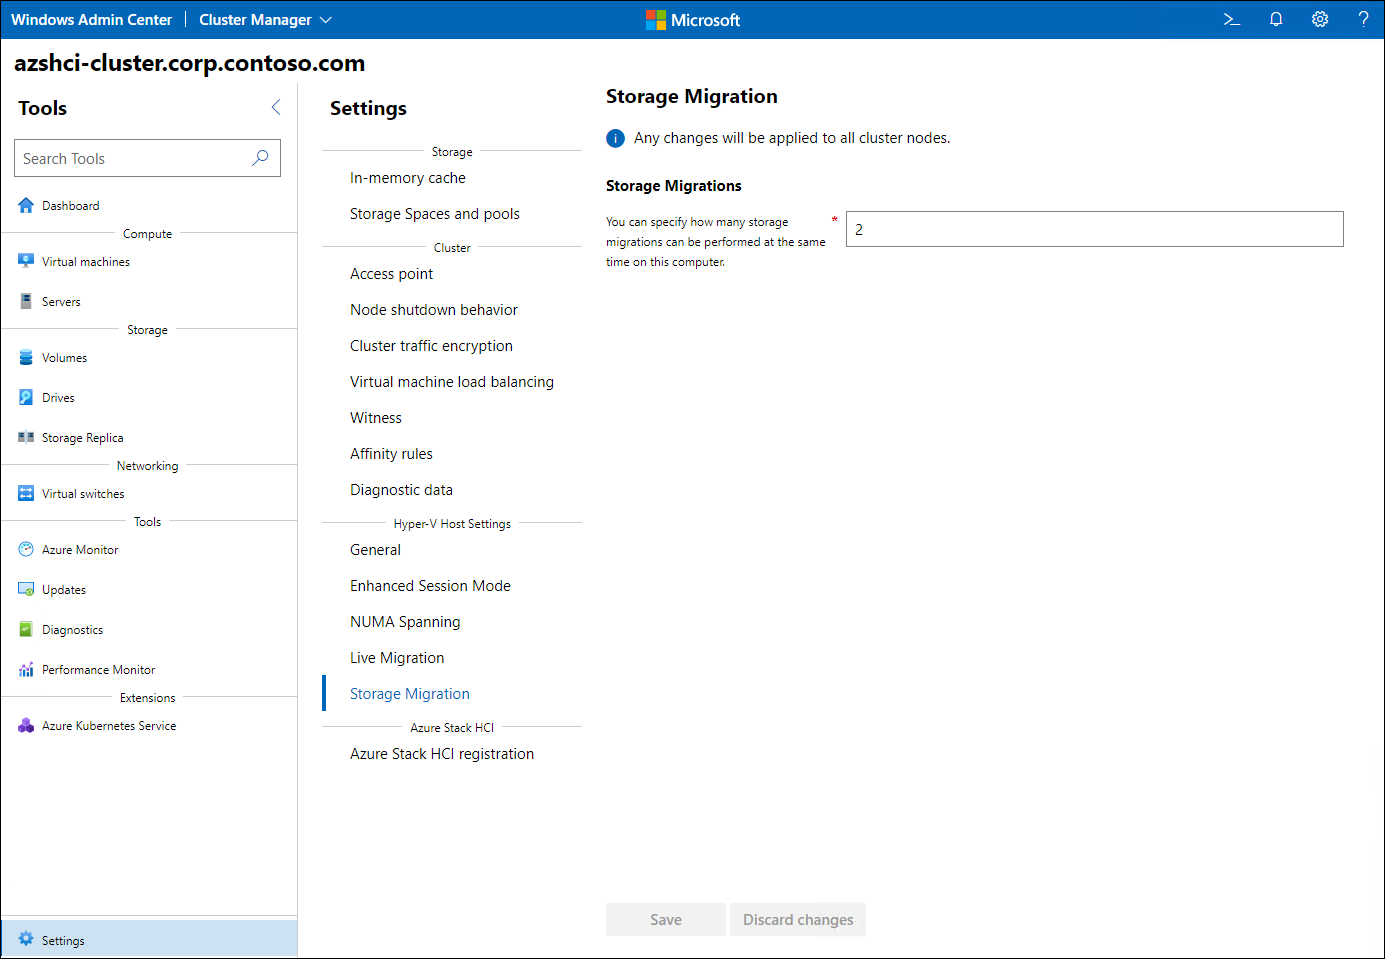 The screenshot depicts the Storage Migration settings of an Azure Stack HCI cluster.